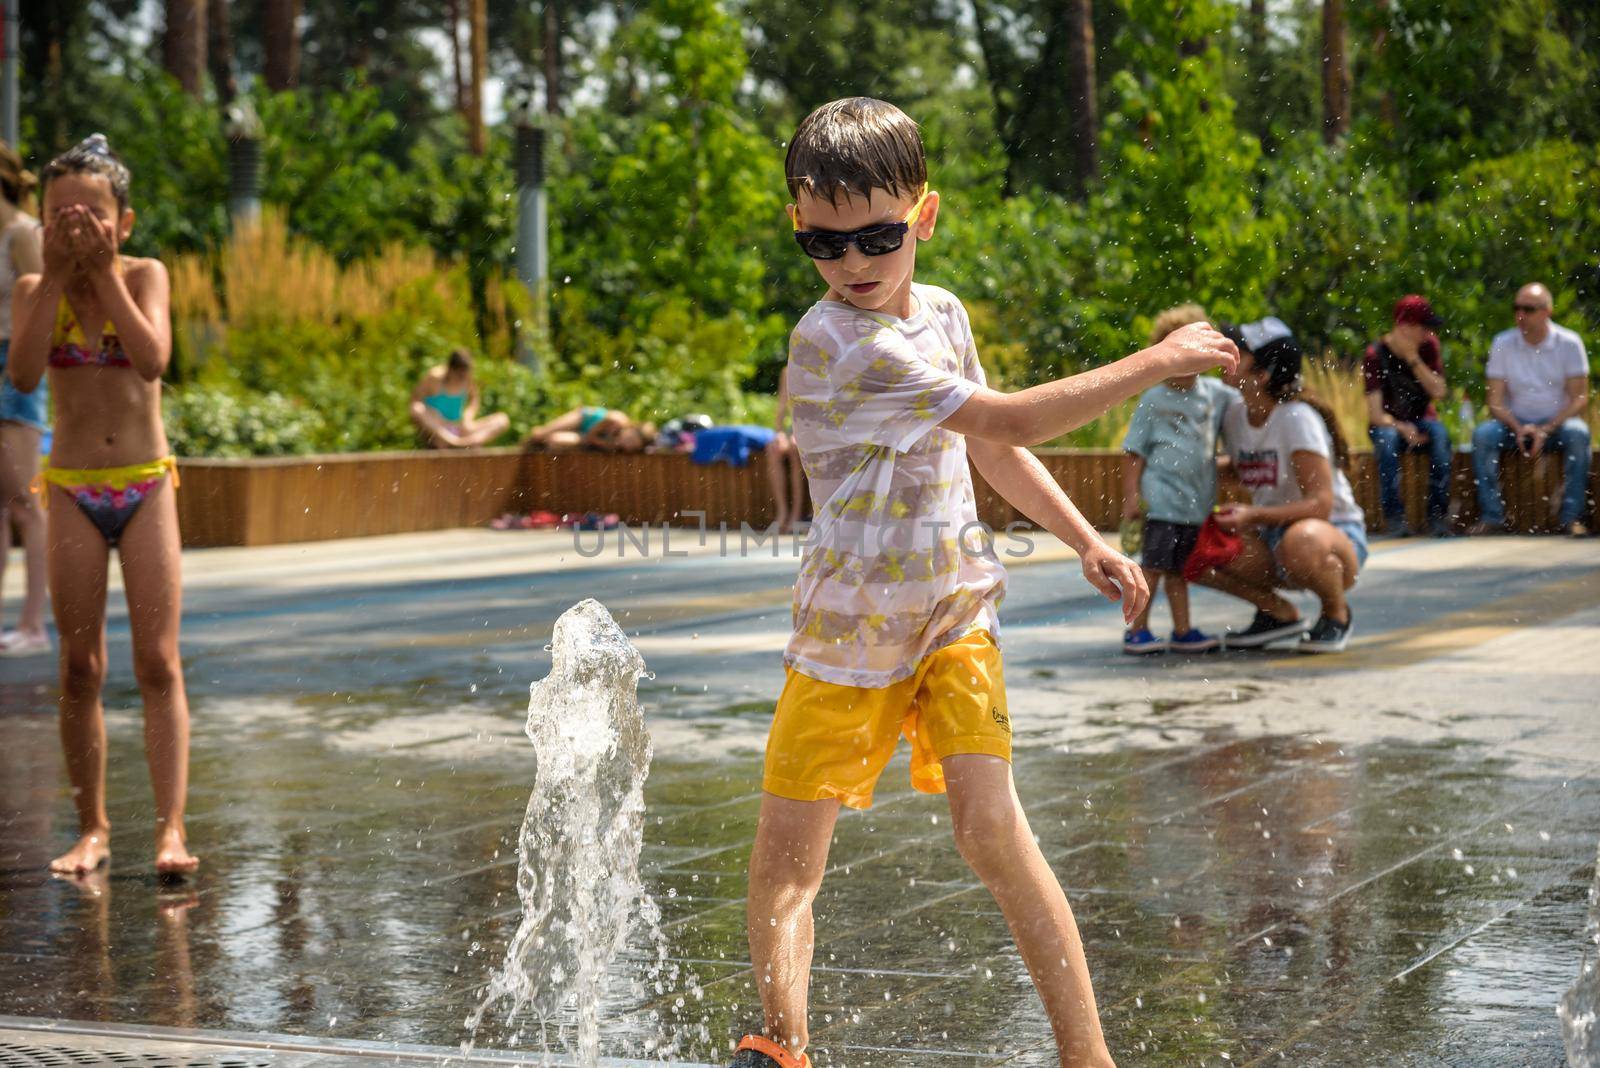 Kyiv, Ukraine - August 01, 2021: Boys jumping in water fountains. Children playing with a city fountain on hot summer day. Happy friends having fun in fountain. Summer weather. Friendship, lifestyle and vacation.